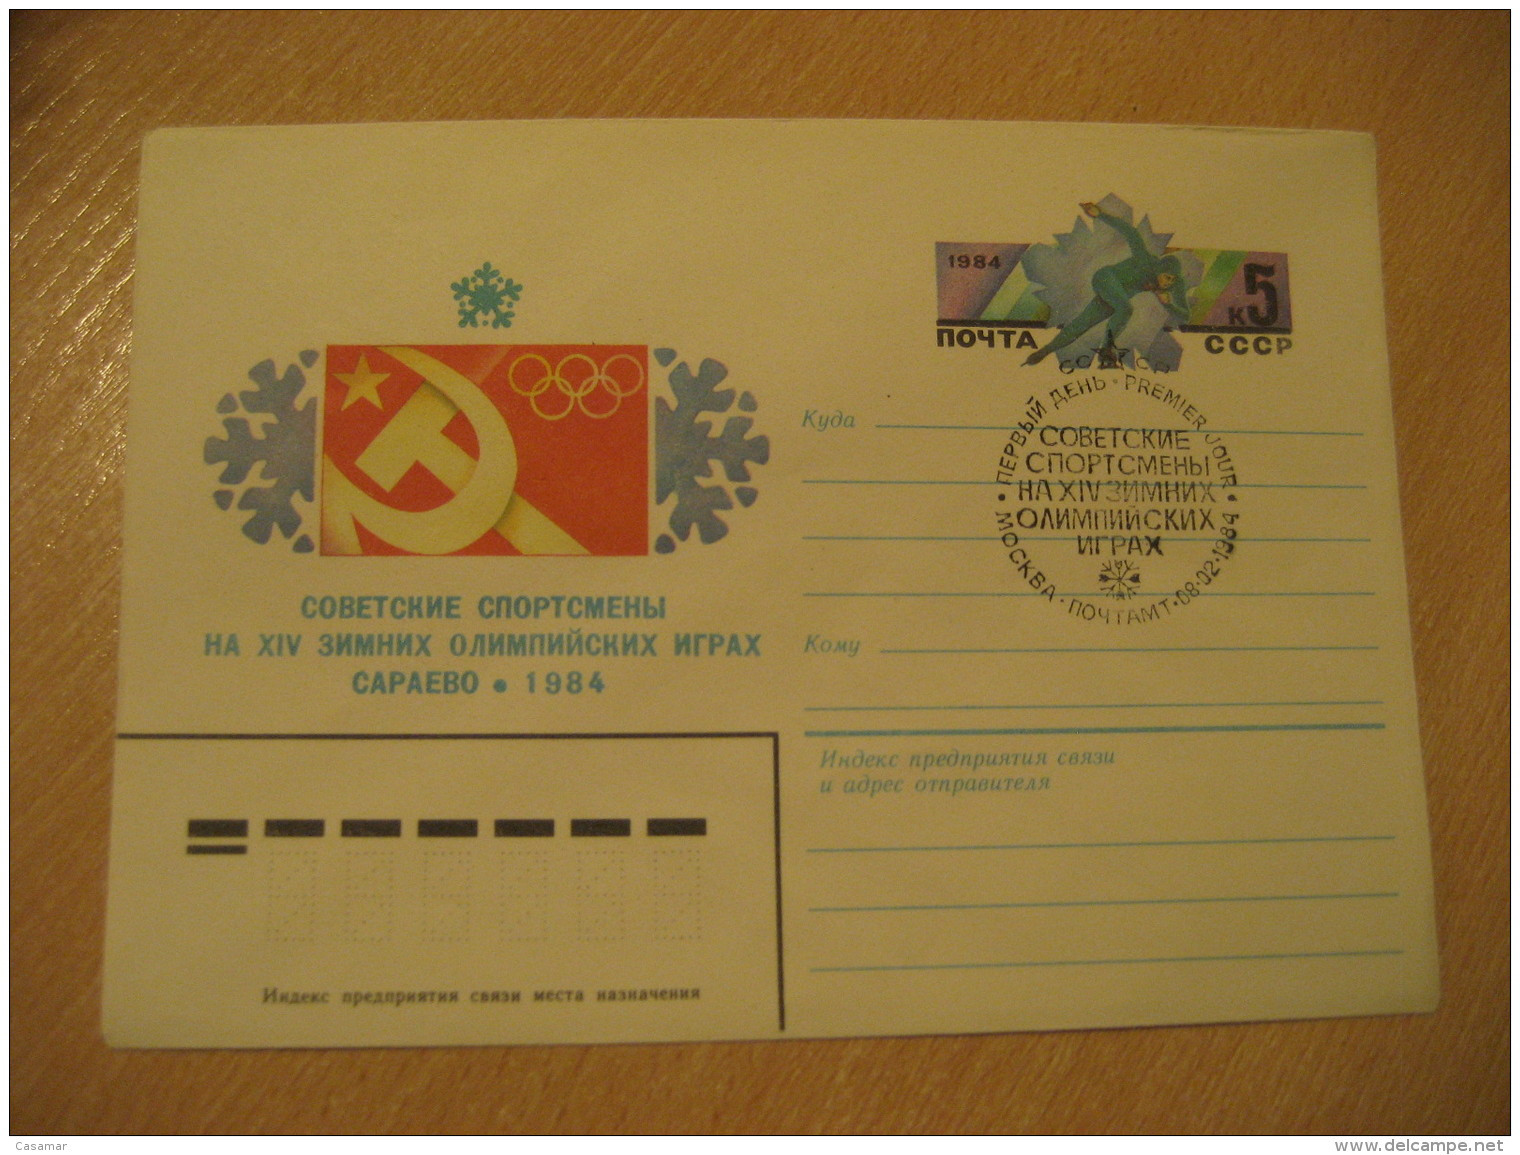 RUSSIA 1984 Olympic Games Olympics Speed Skating On Ice Patinage De Vitesse Sur Glace Postal Stationery Cover USSR CCCP - Kunstschaatsen